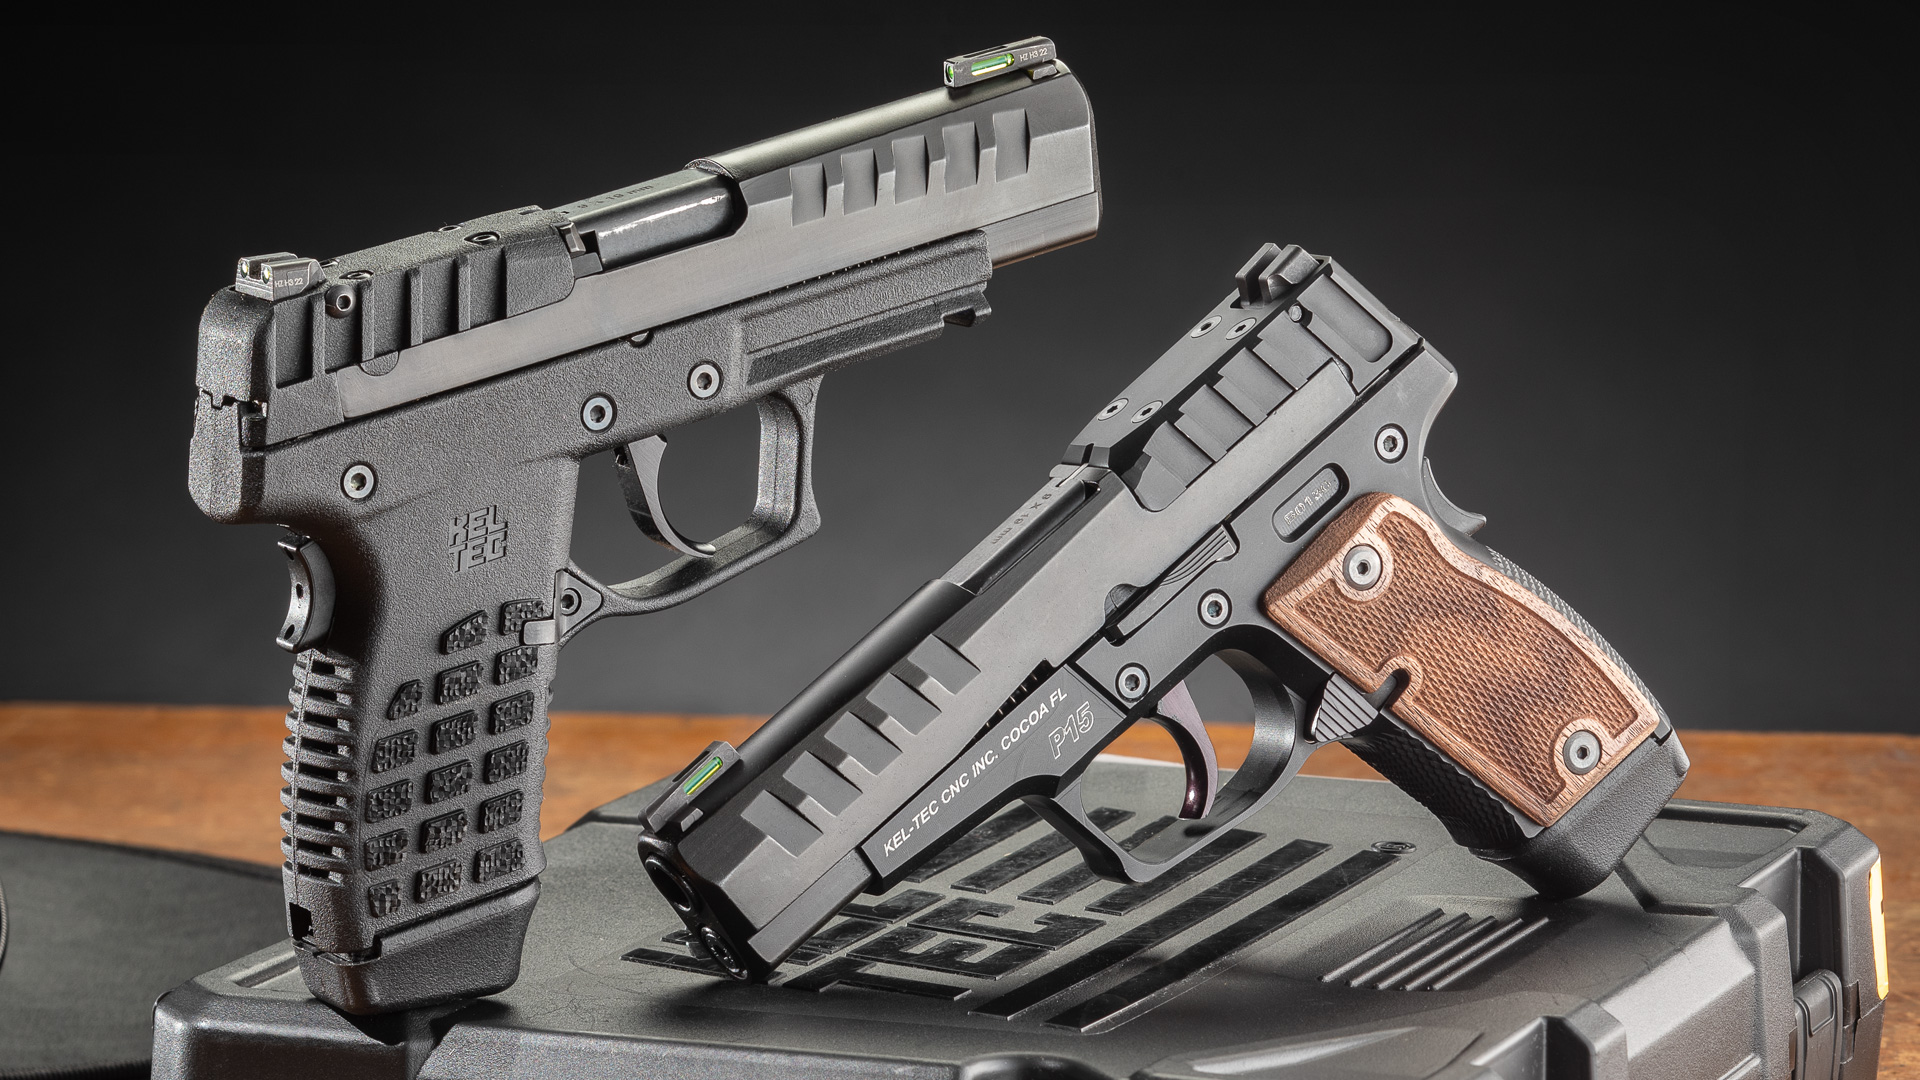 KelTec's P15: Pistol For The People